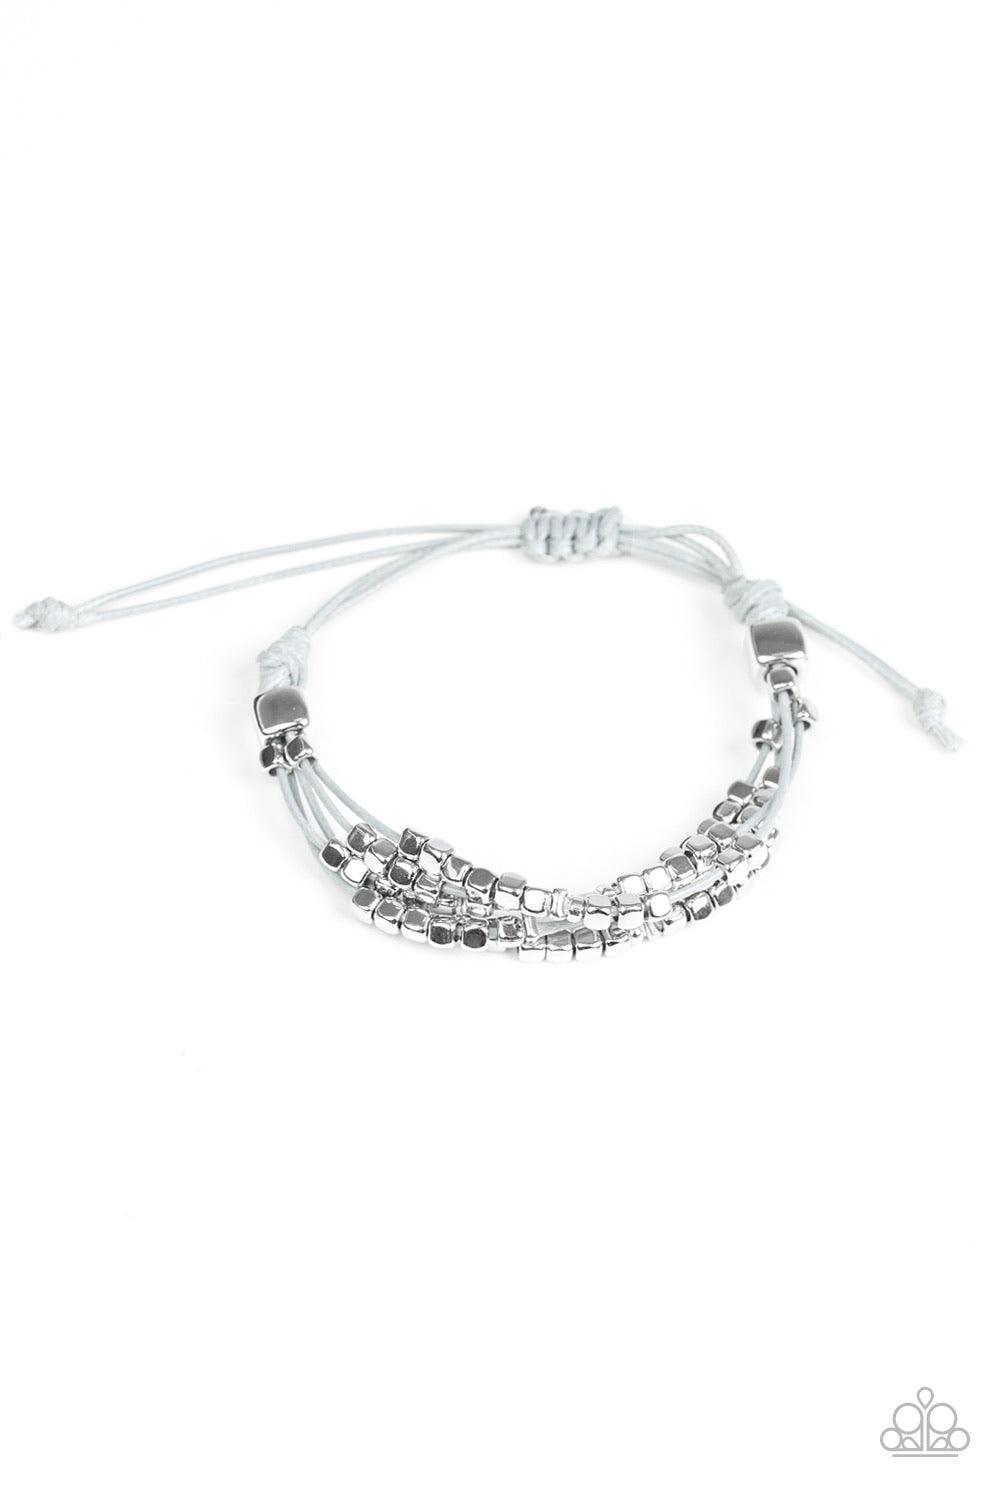 Paparazzi Accessories Modern Minimalism - Silver A collection of dainty silver beads and glistening silver cubes are threaded along strands of shiny gray cording around the wrist for a minimalist inspired look. Features an adjustable sliding knot clos Jew